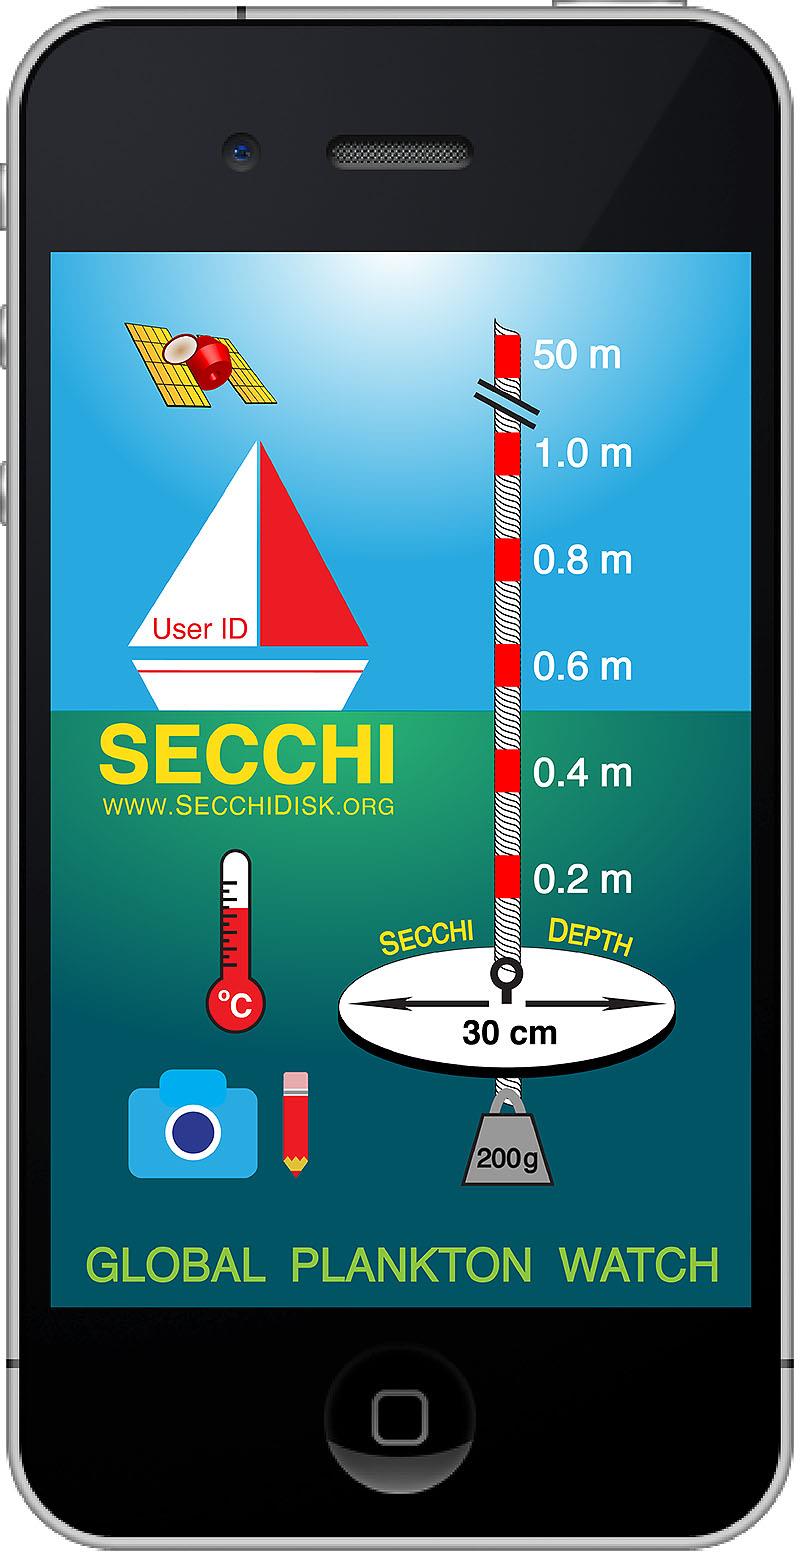 Home page of the Secchi App photo copyright Secchi Disk Study taken at 